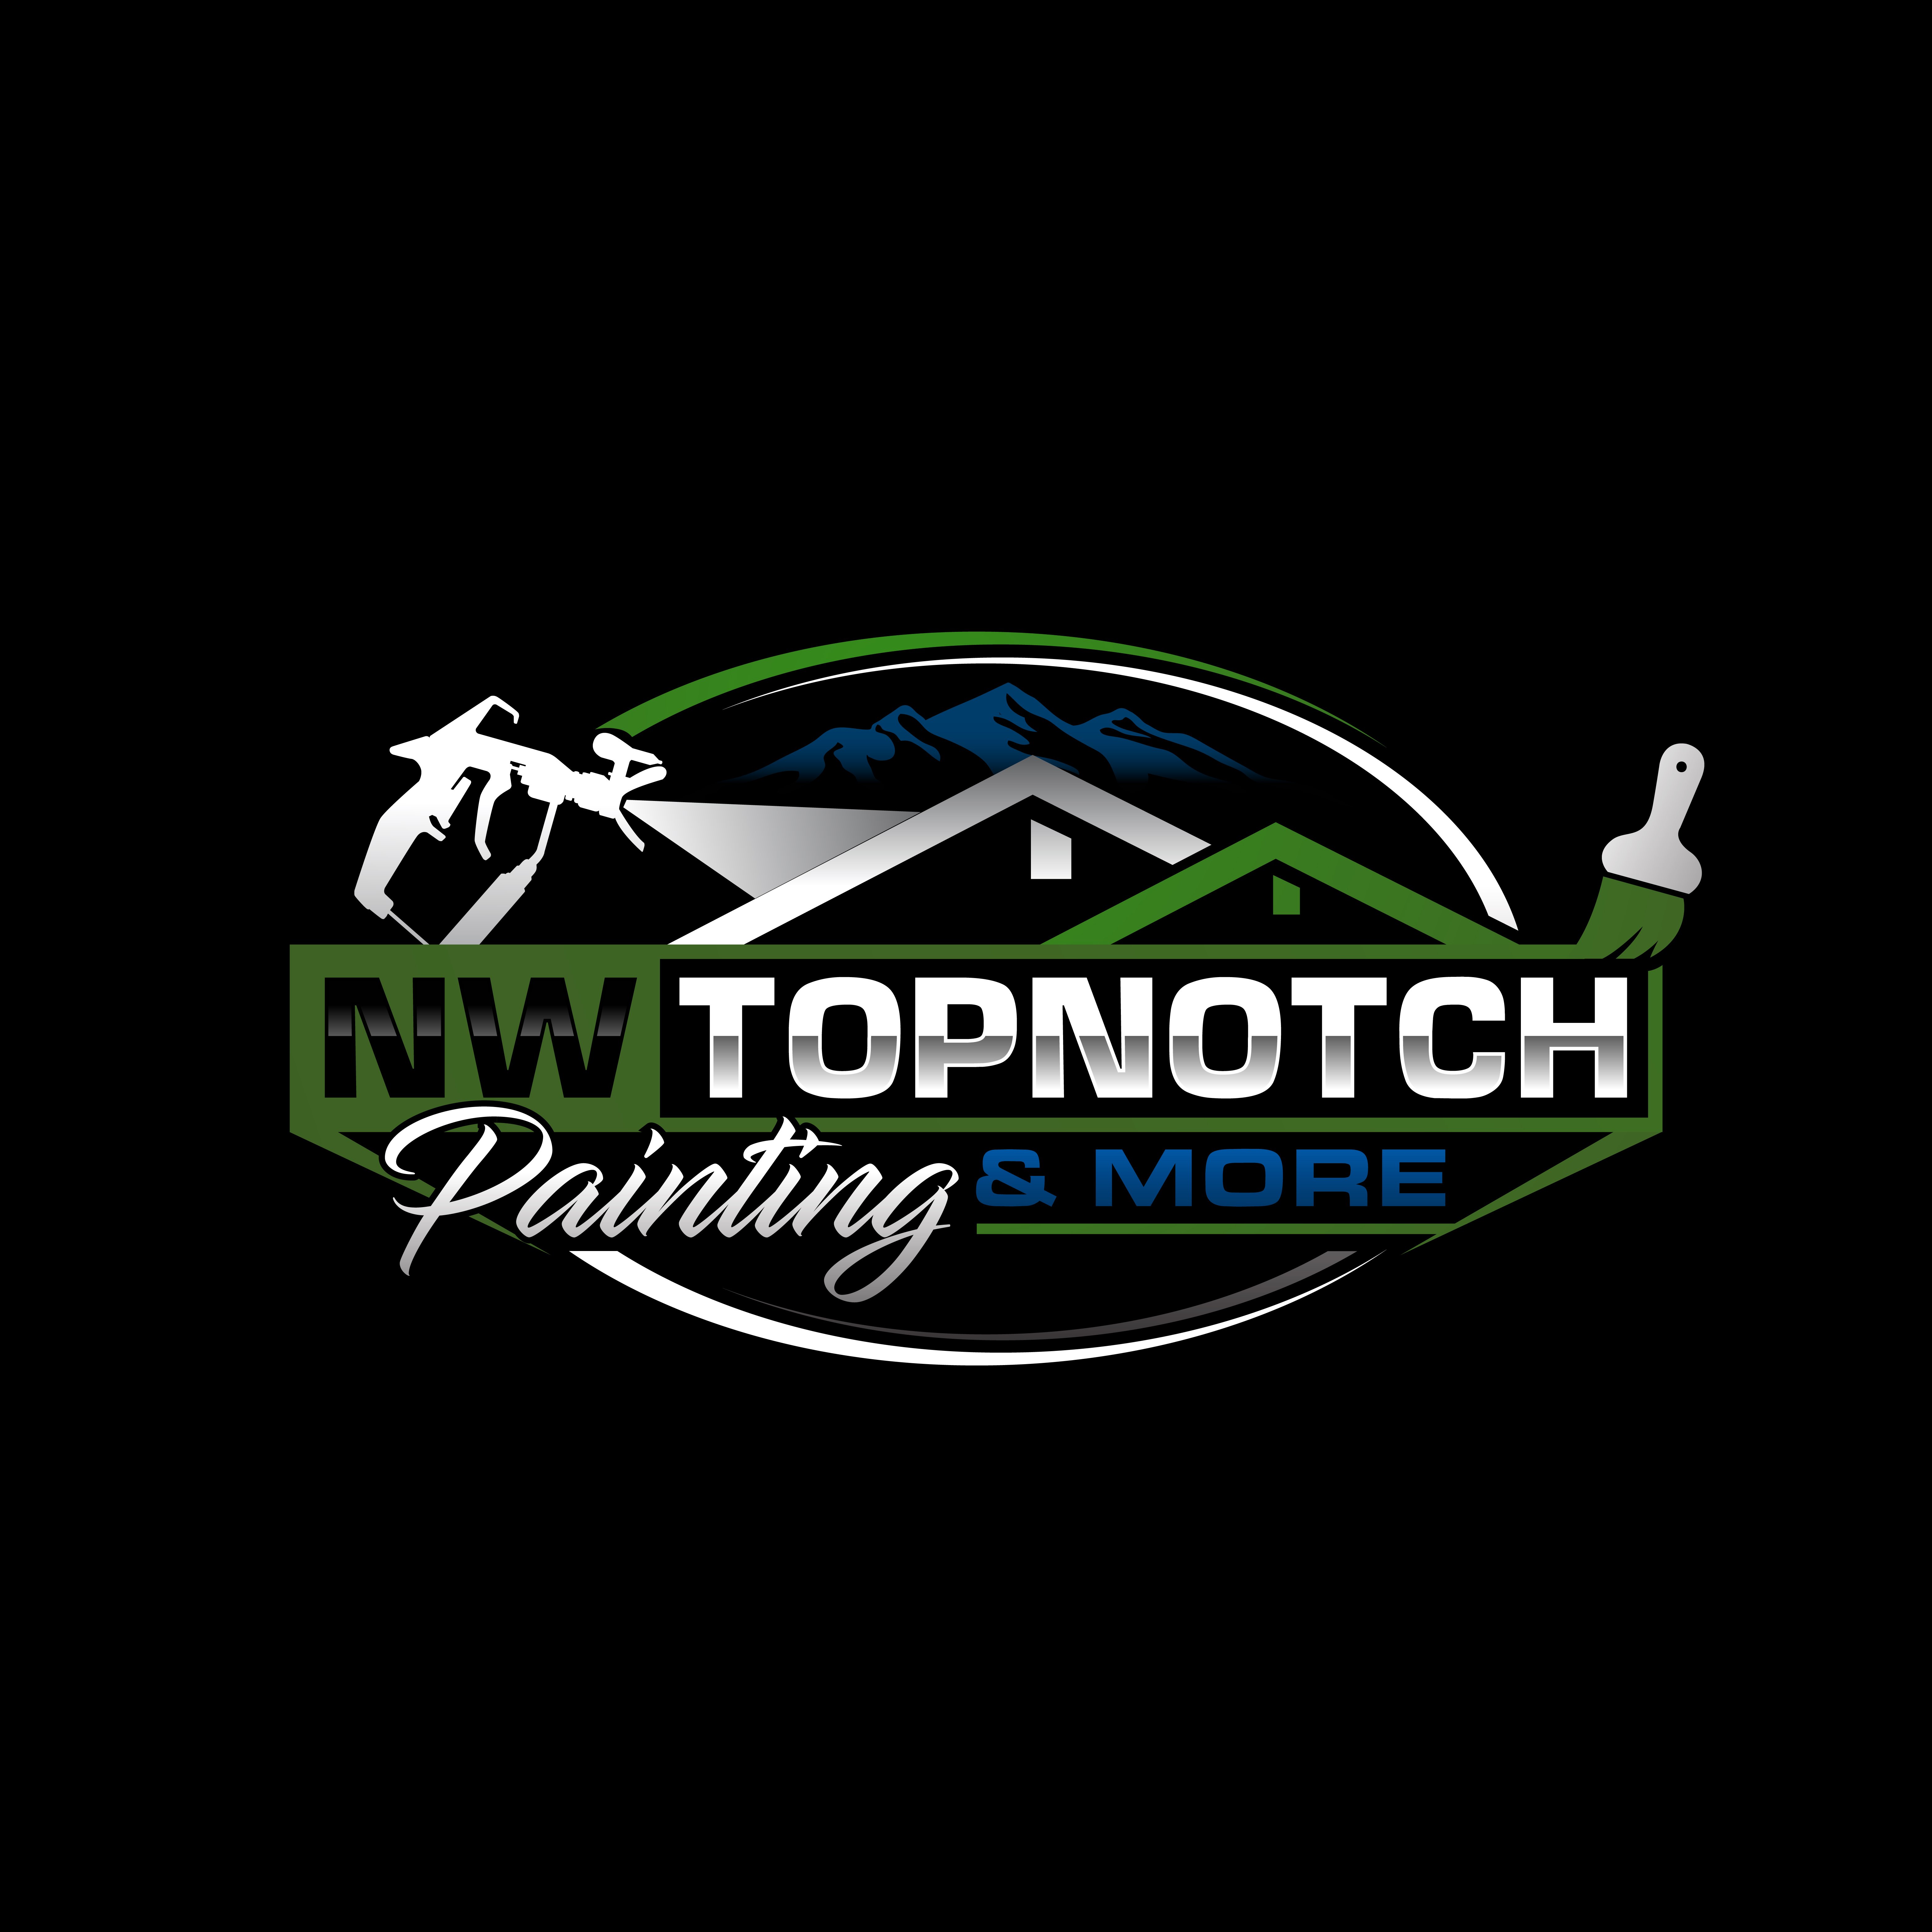 NW Topnotch Painting & More Logo